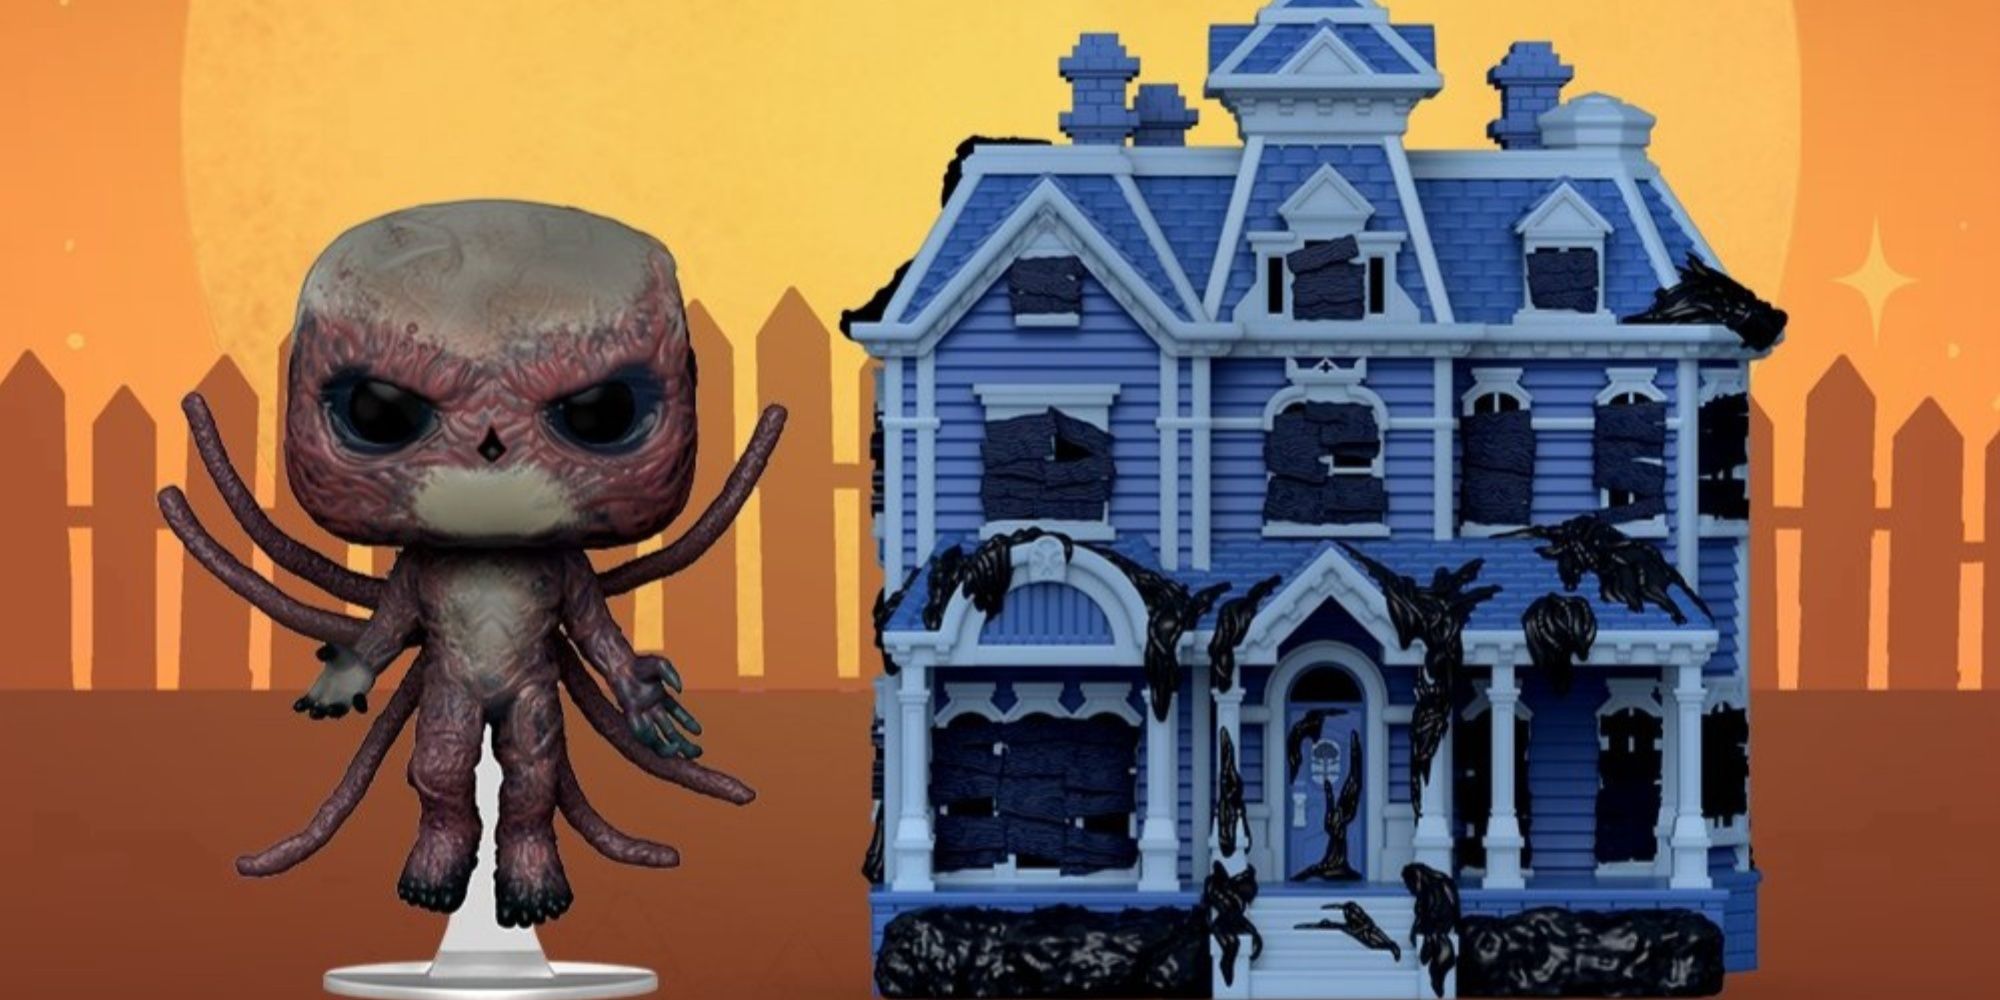 vecna funko pop with creel house poptown from stranger things